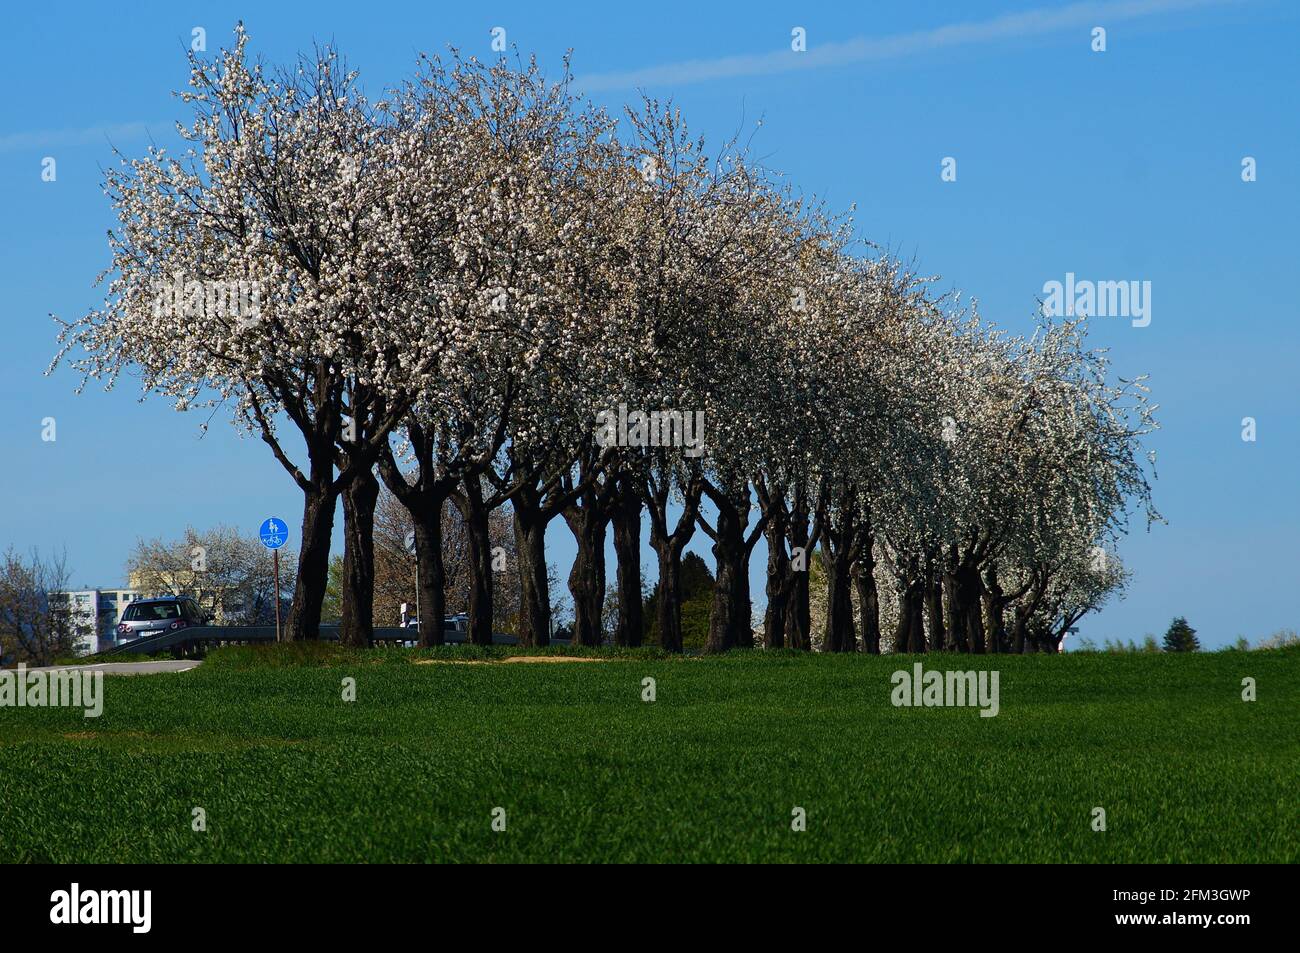 A row of flowering cherry trees along a country road. Stock Photo